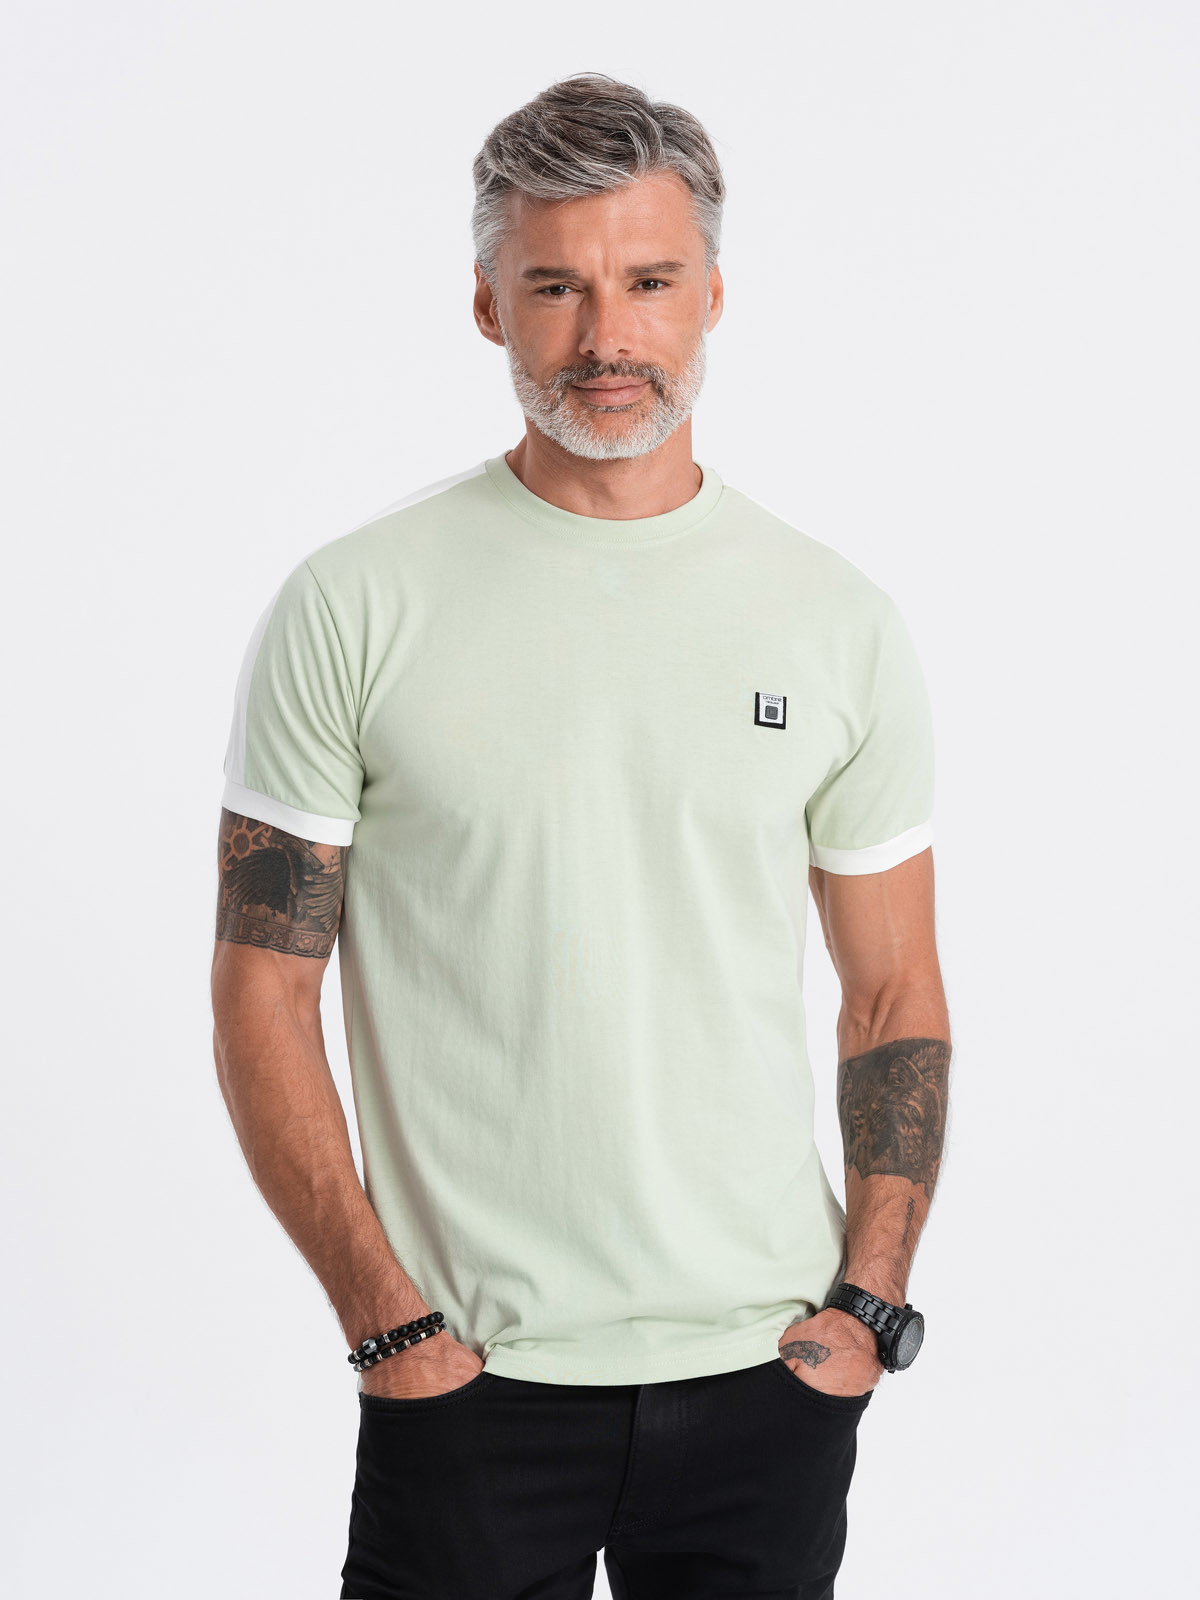 Men's cotton t-shirt with contrasting inserts V9 S1632